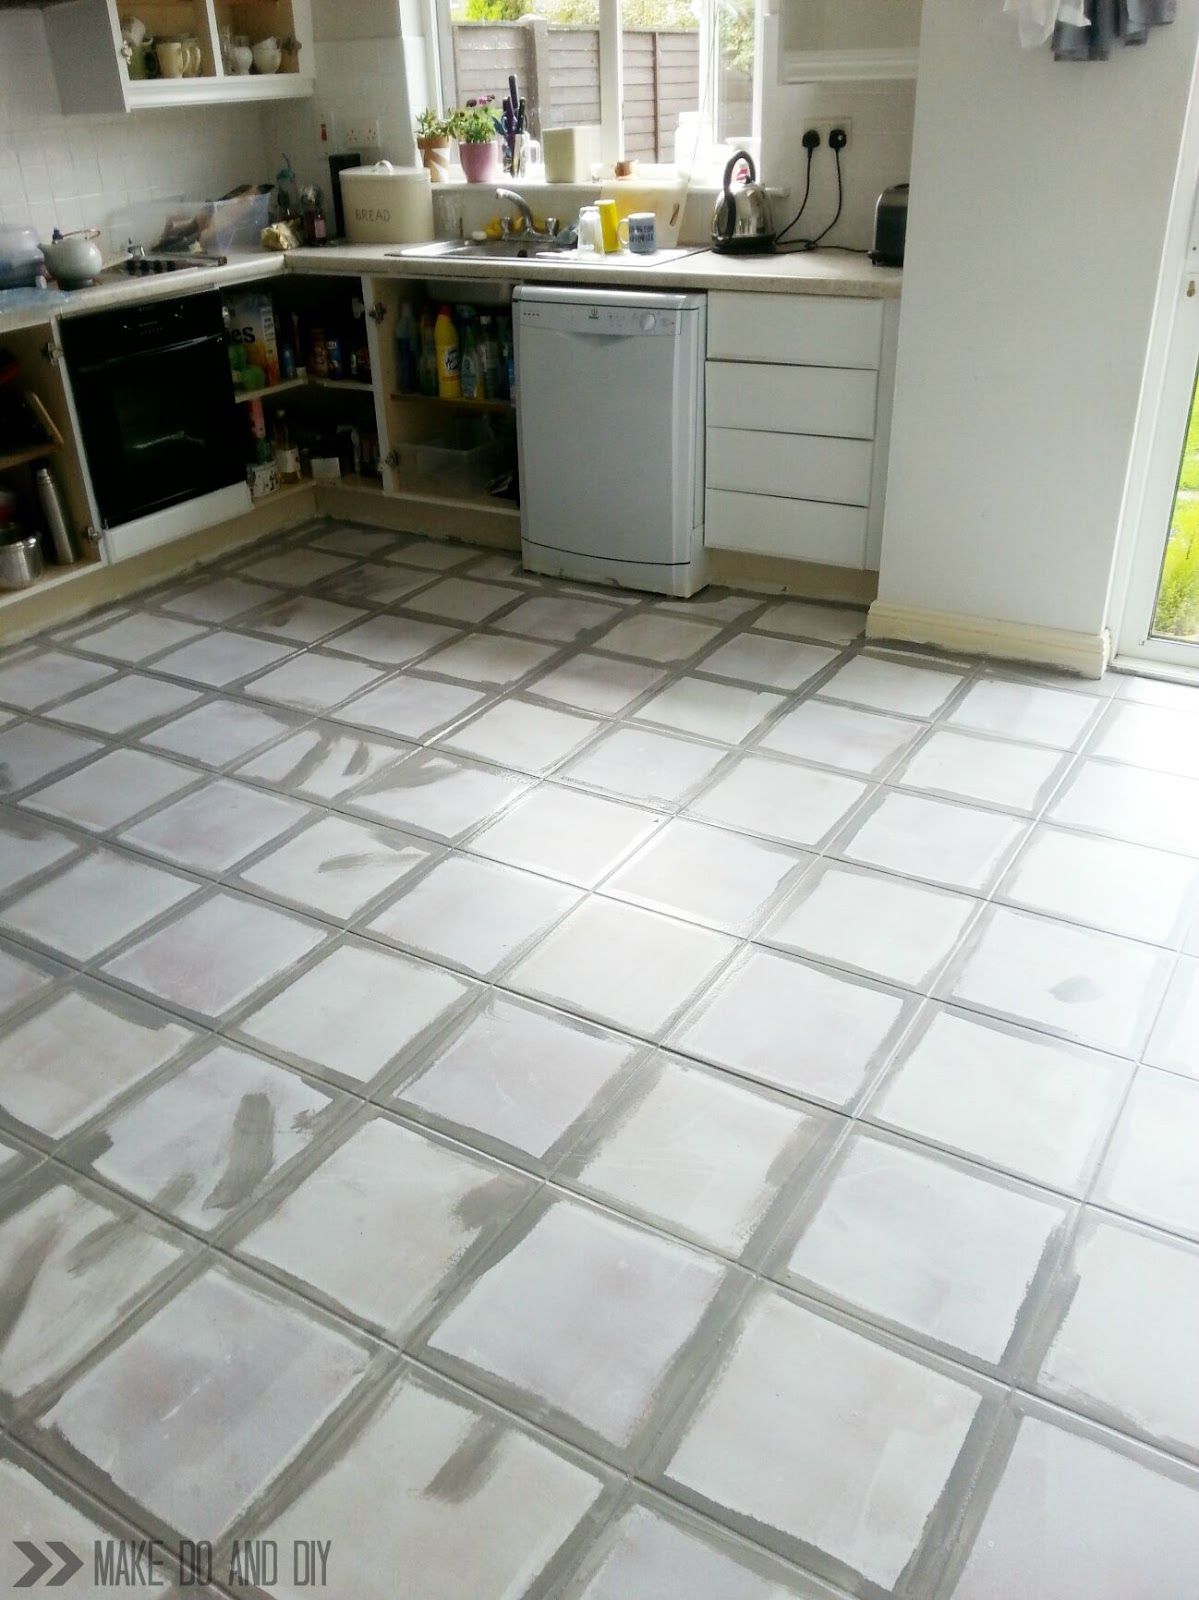 Painted Tile Floor No Really Make Do And Diy pertaining to sizing 1199 X 1600